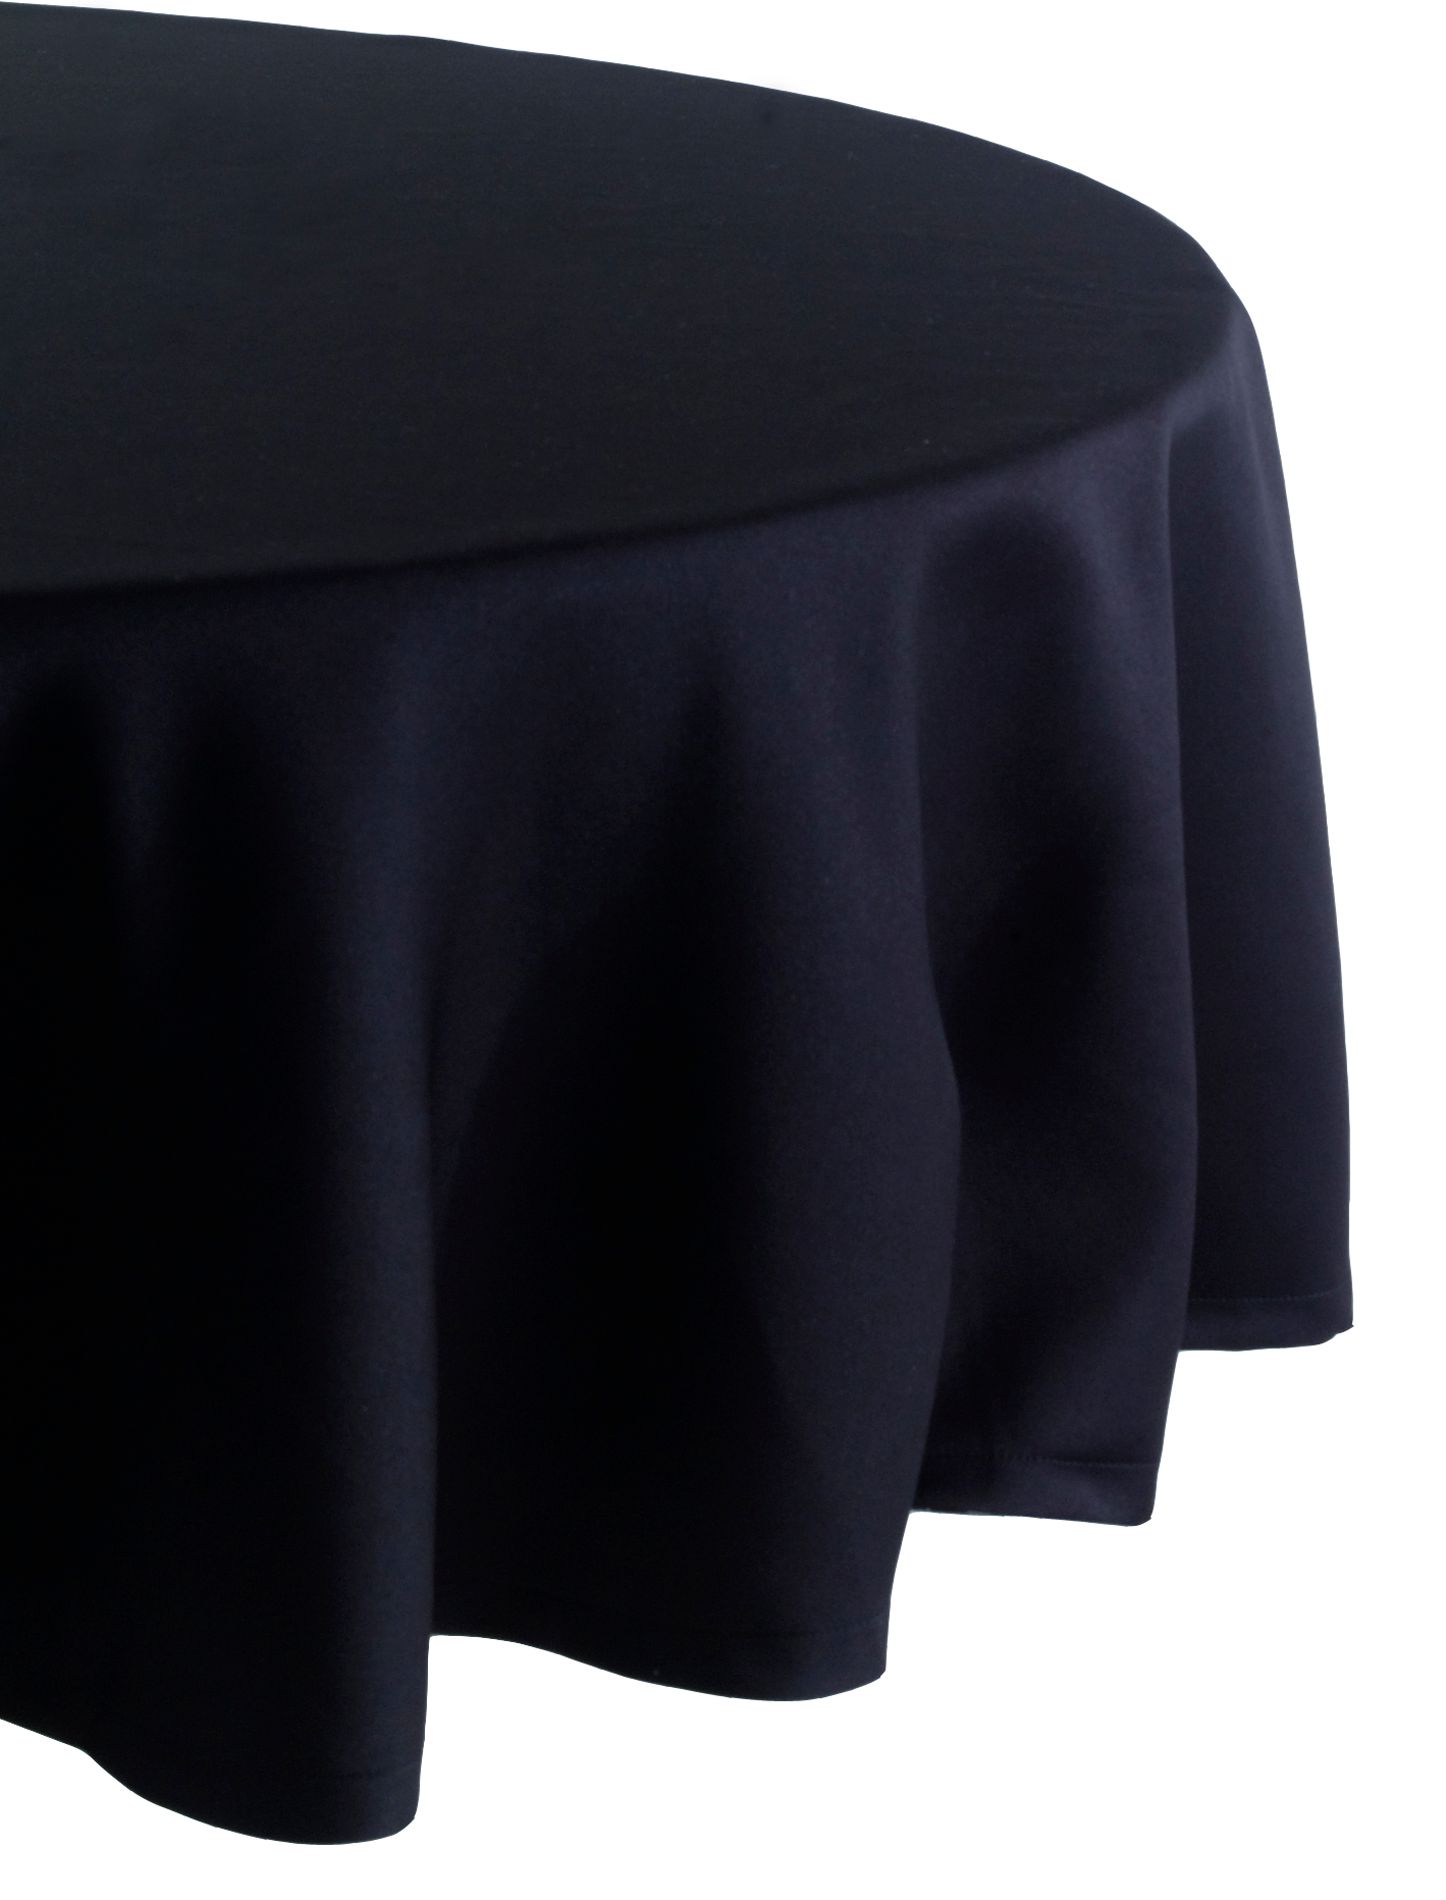 70 in Round Tablecloth